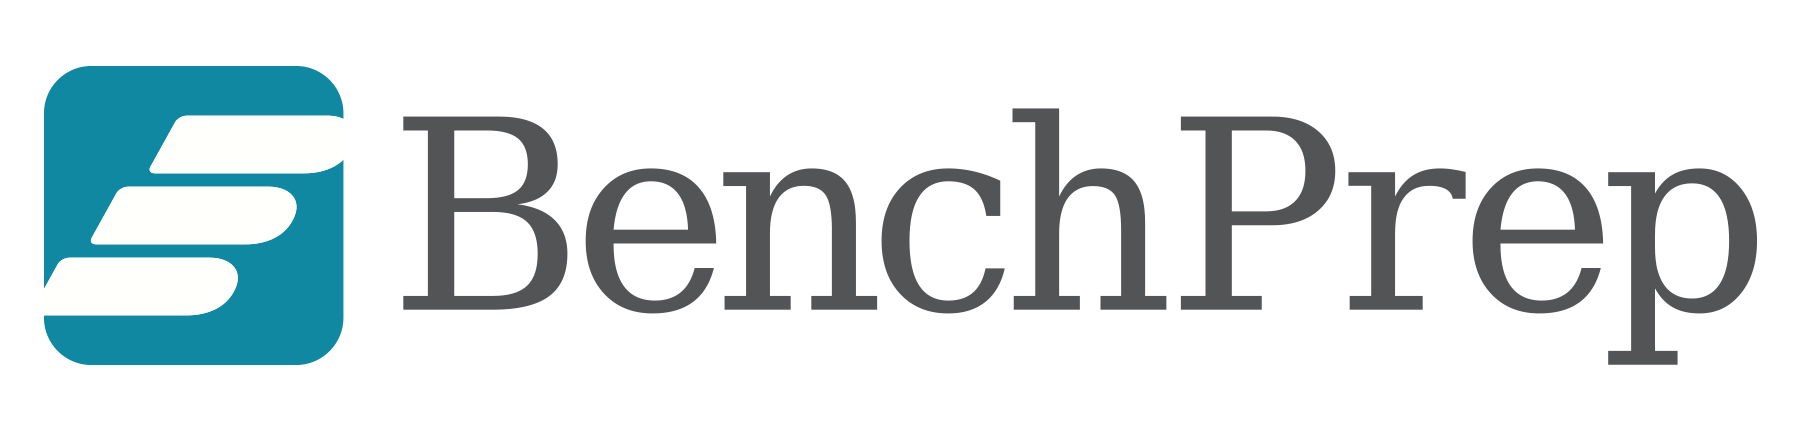 Chicago-based learning success platform, BenchPrep, was able to successfully scale their infrastructure and provide an unmatched learning experience to its customers using recommended solutions from 2ndQuadrant.